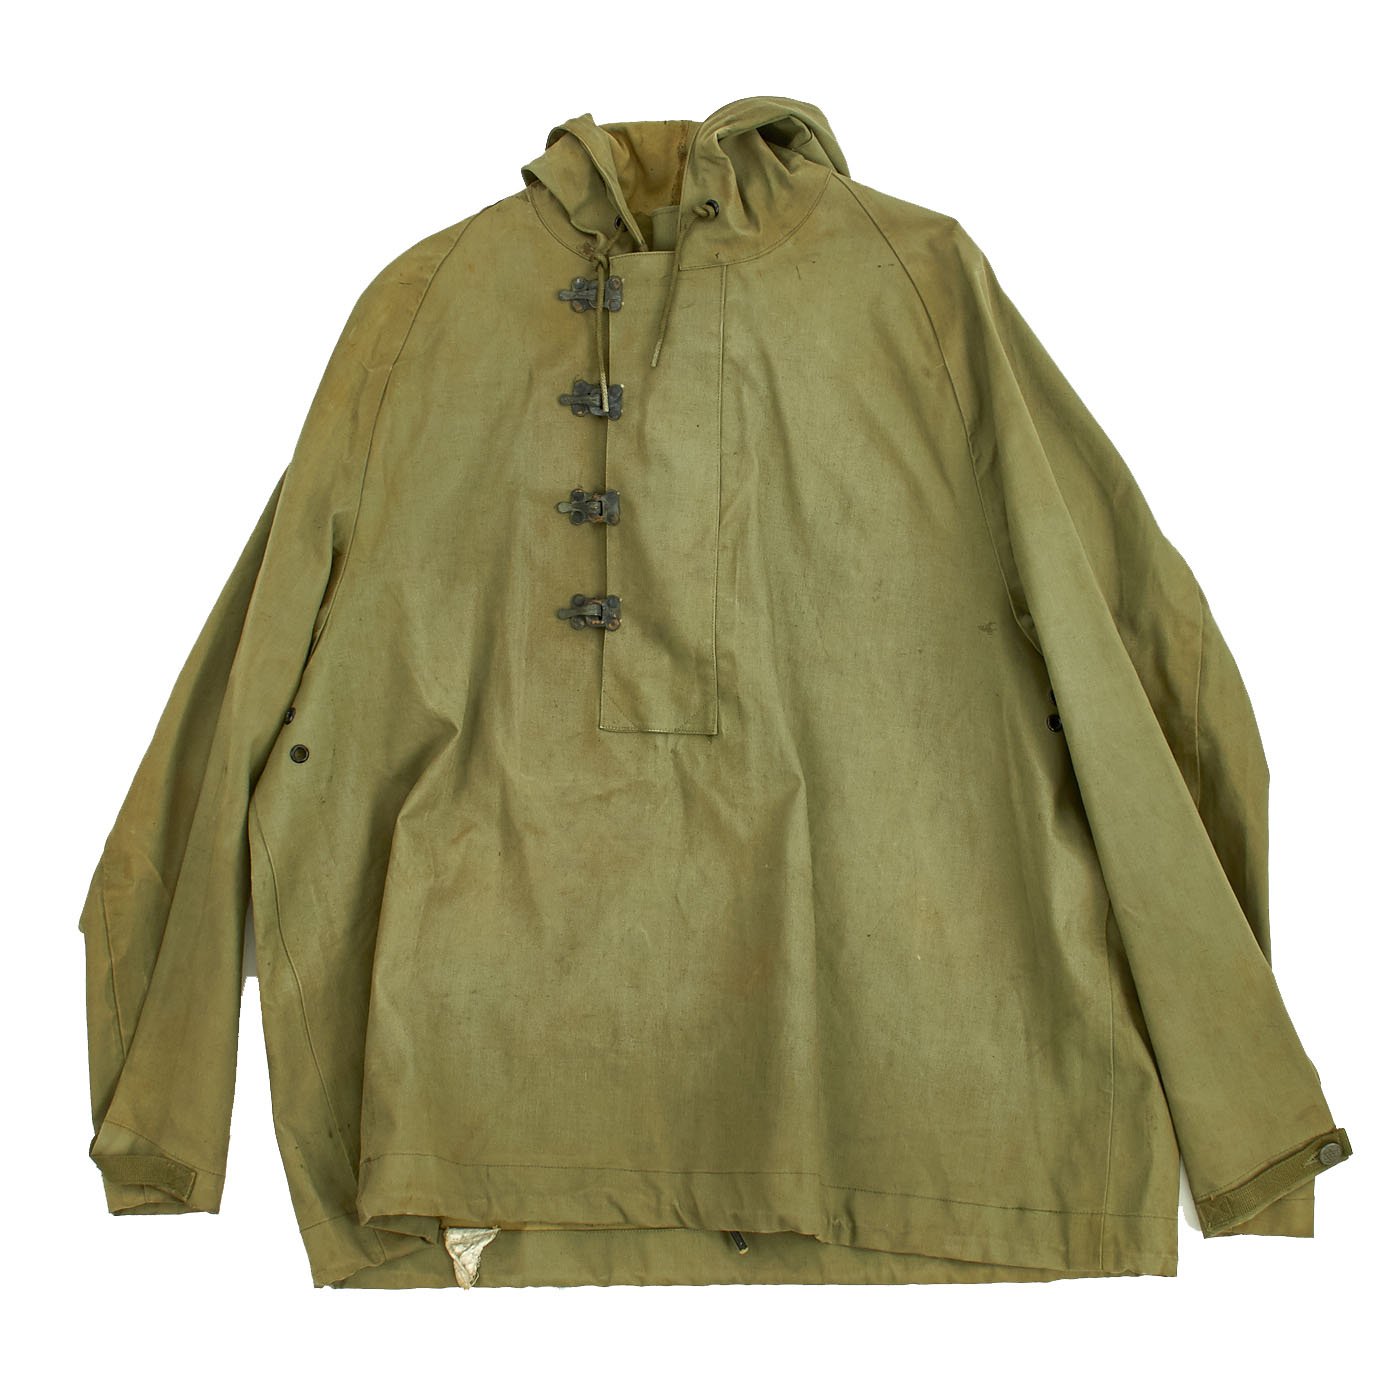 Original U.S. WWII Navy Rain Deck Jacket in Mint Condition - Size Large ...